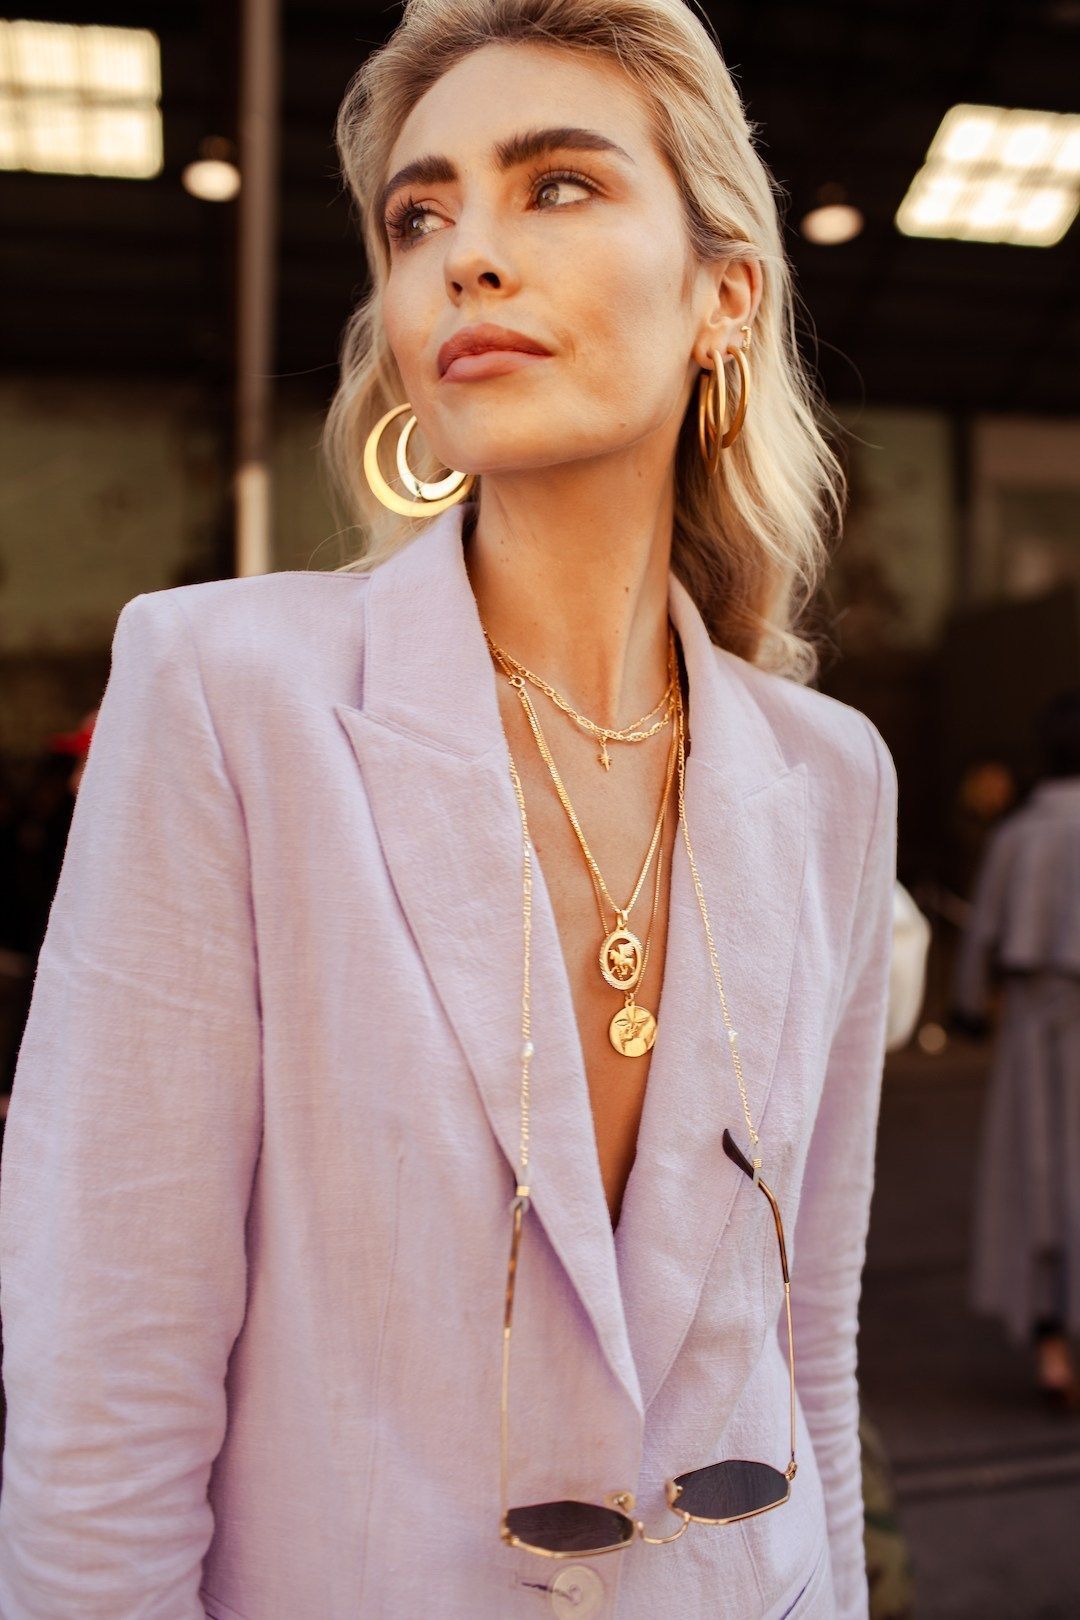 MBFWA 2019: The best street style looks from Day One | Husskie - MBFWA 2019: The best street style looks from Day One | Husskie -   17 style Chic classique ideas